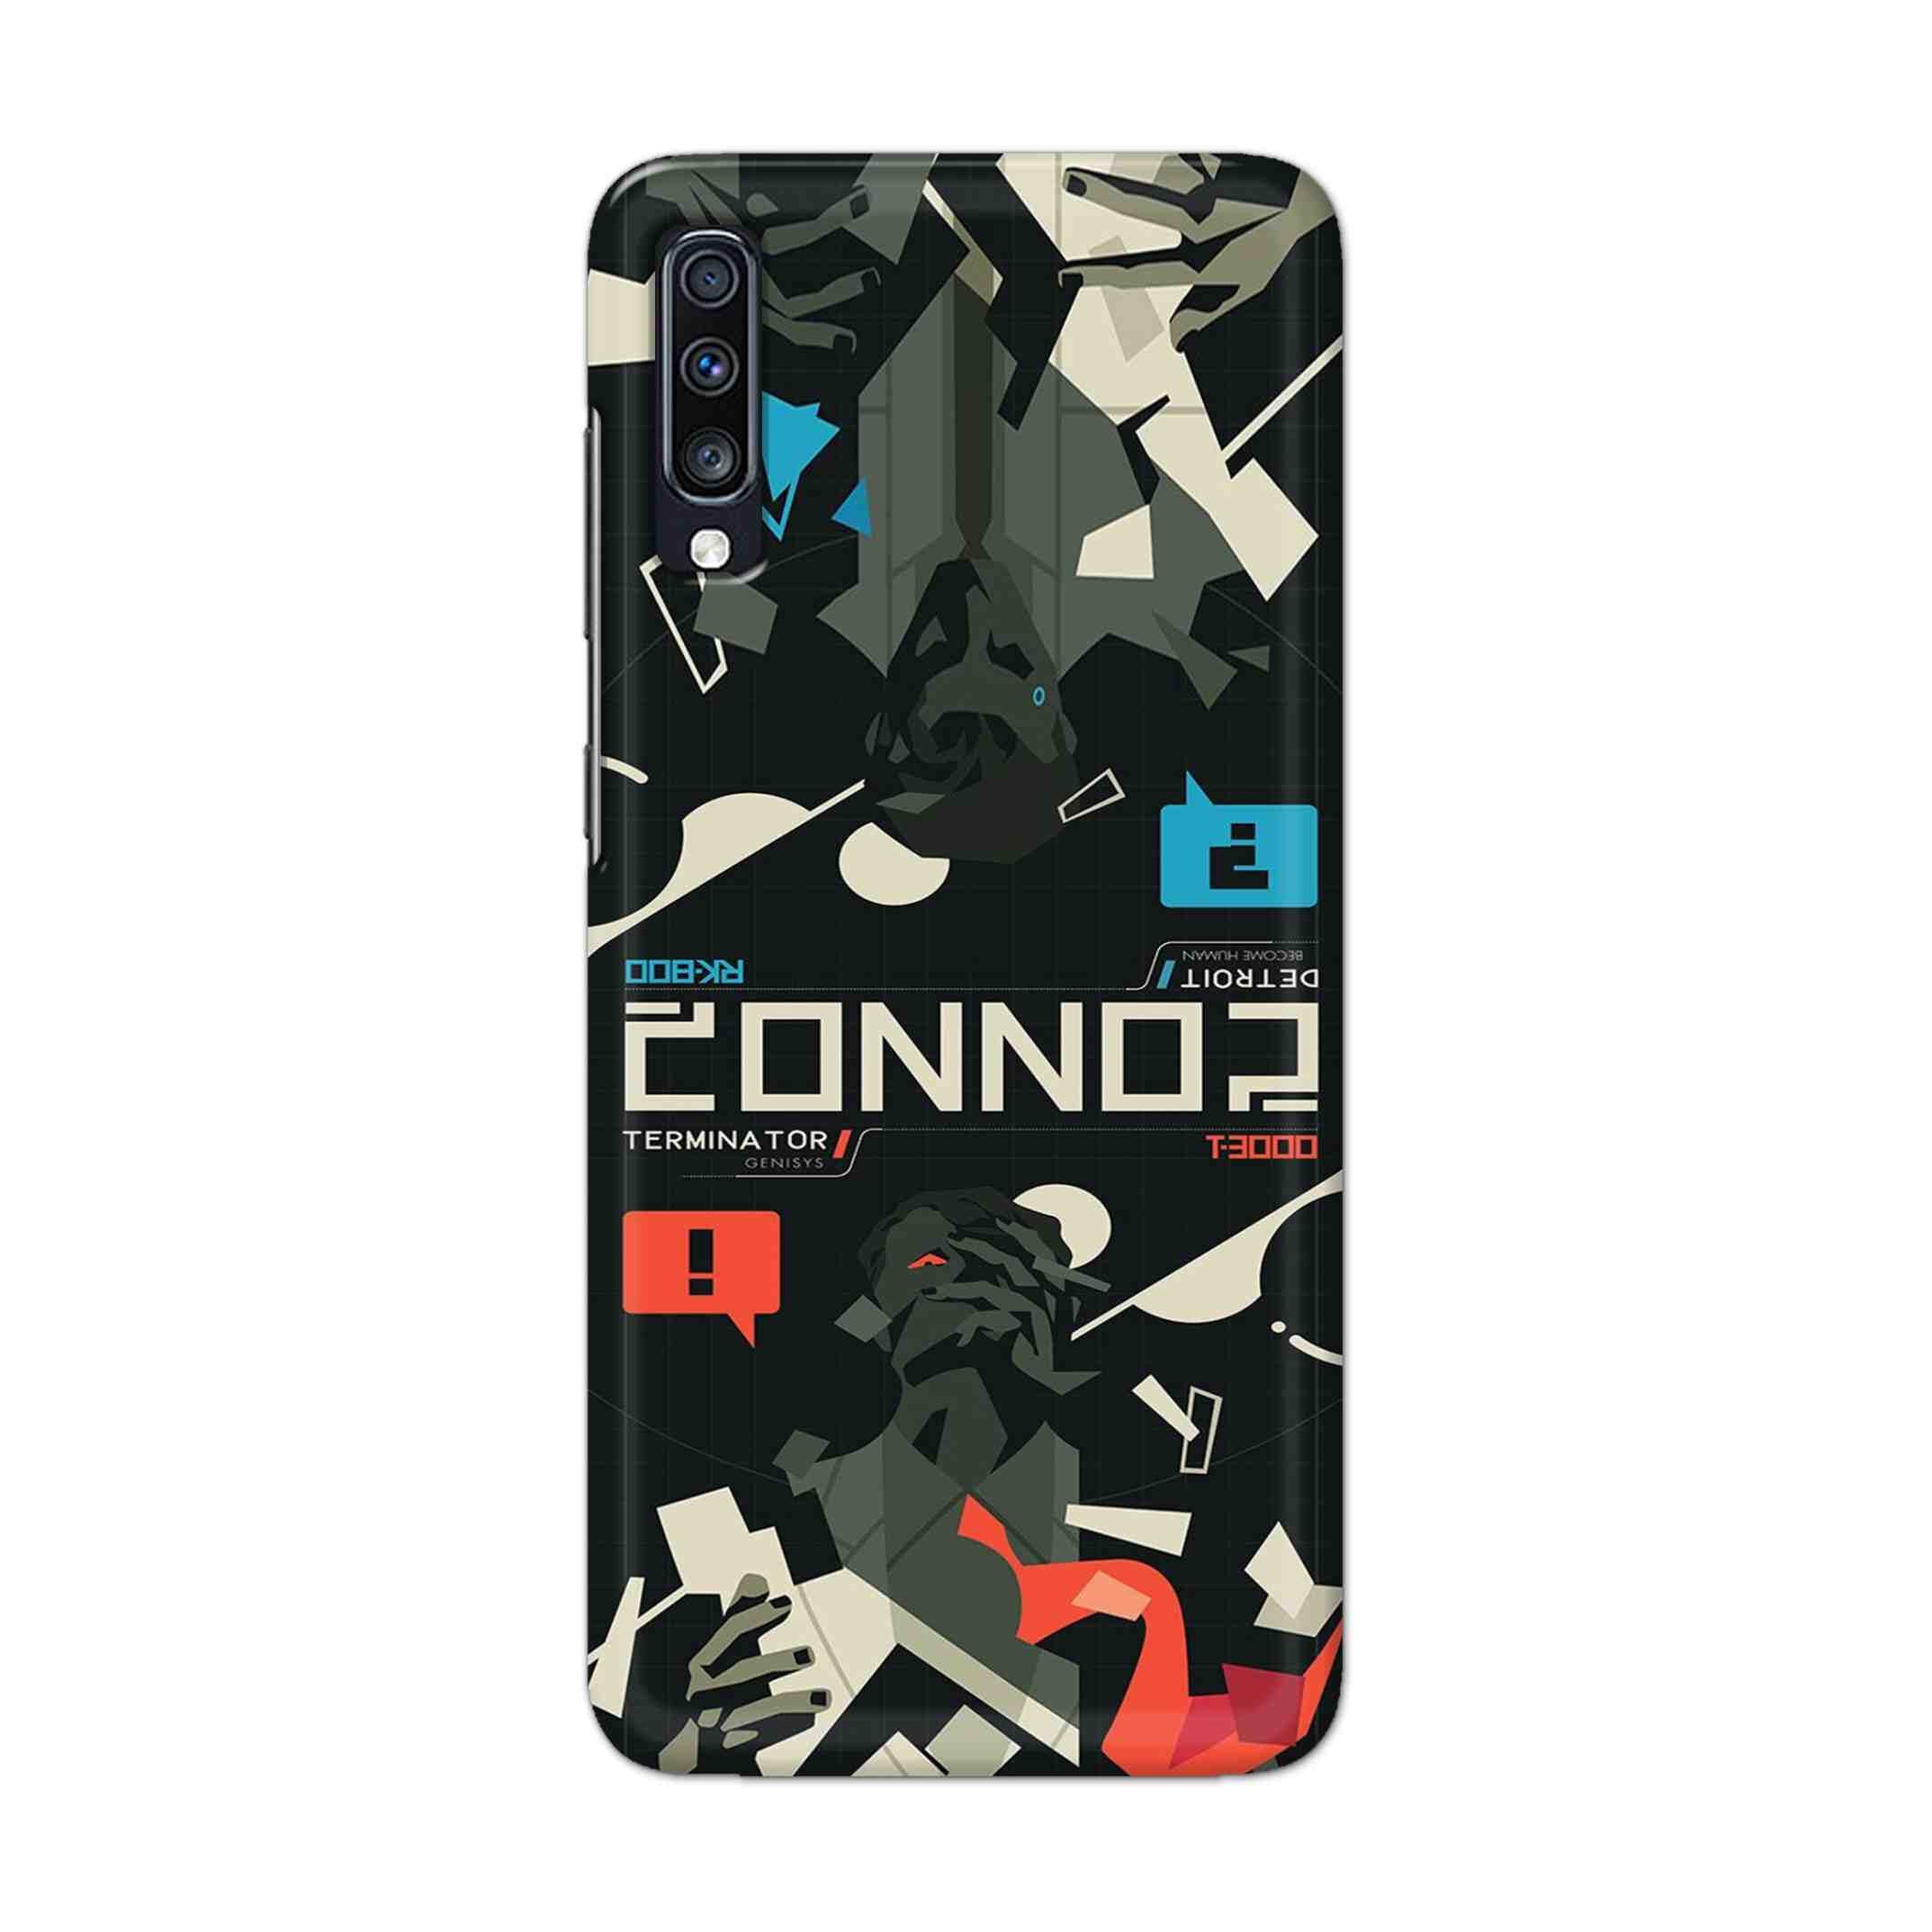 Buy Terminator Hard Back Mobile Phone Case Cover For Samsung Galaxy A70 Online